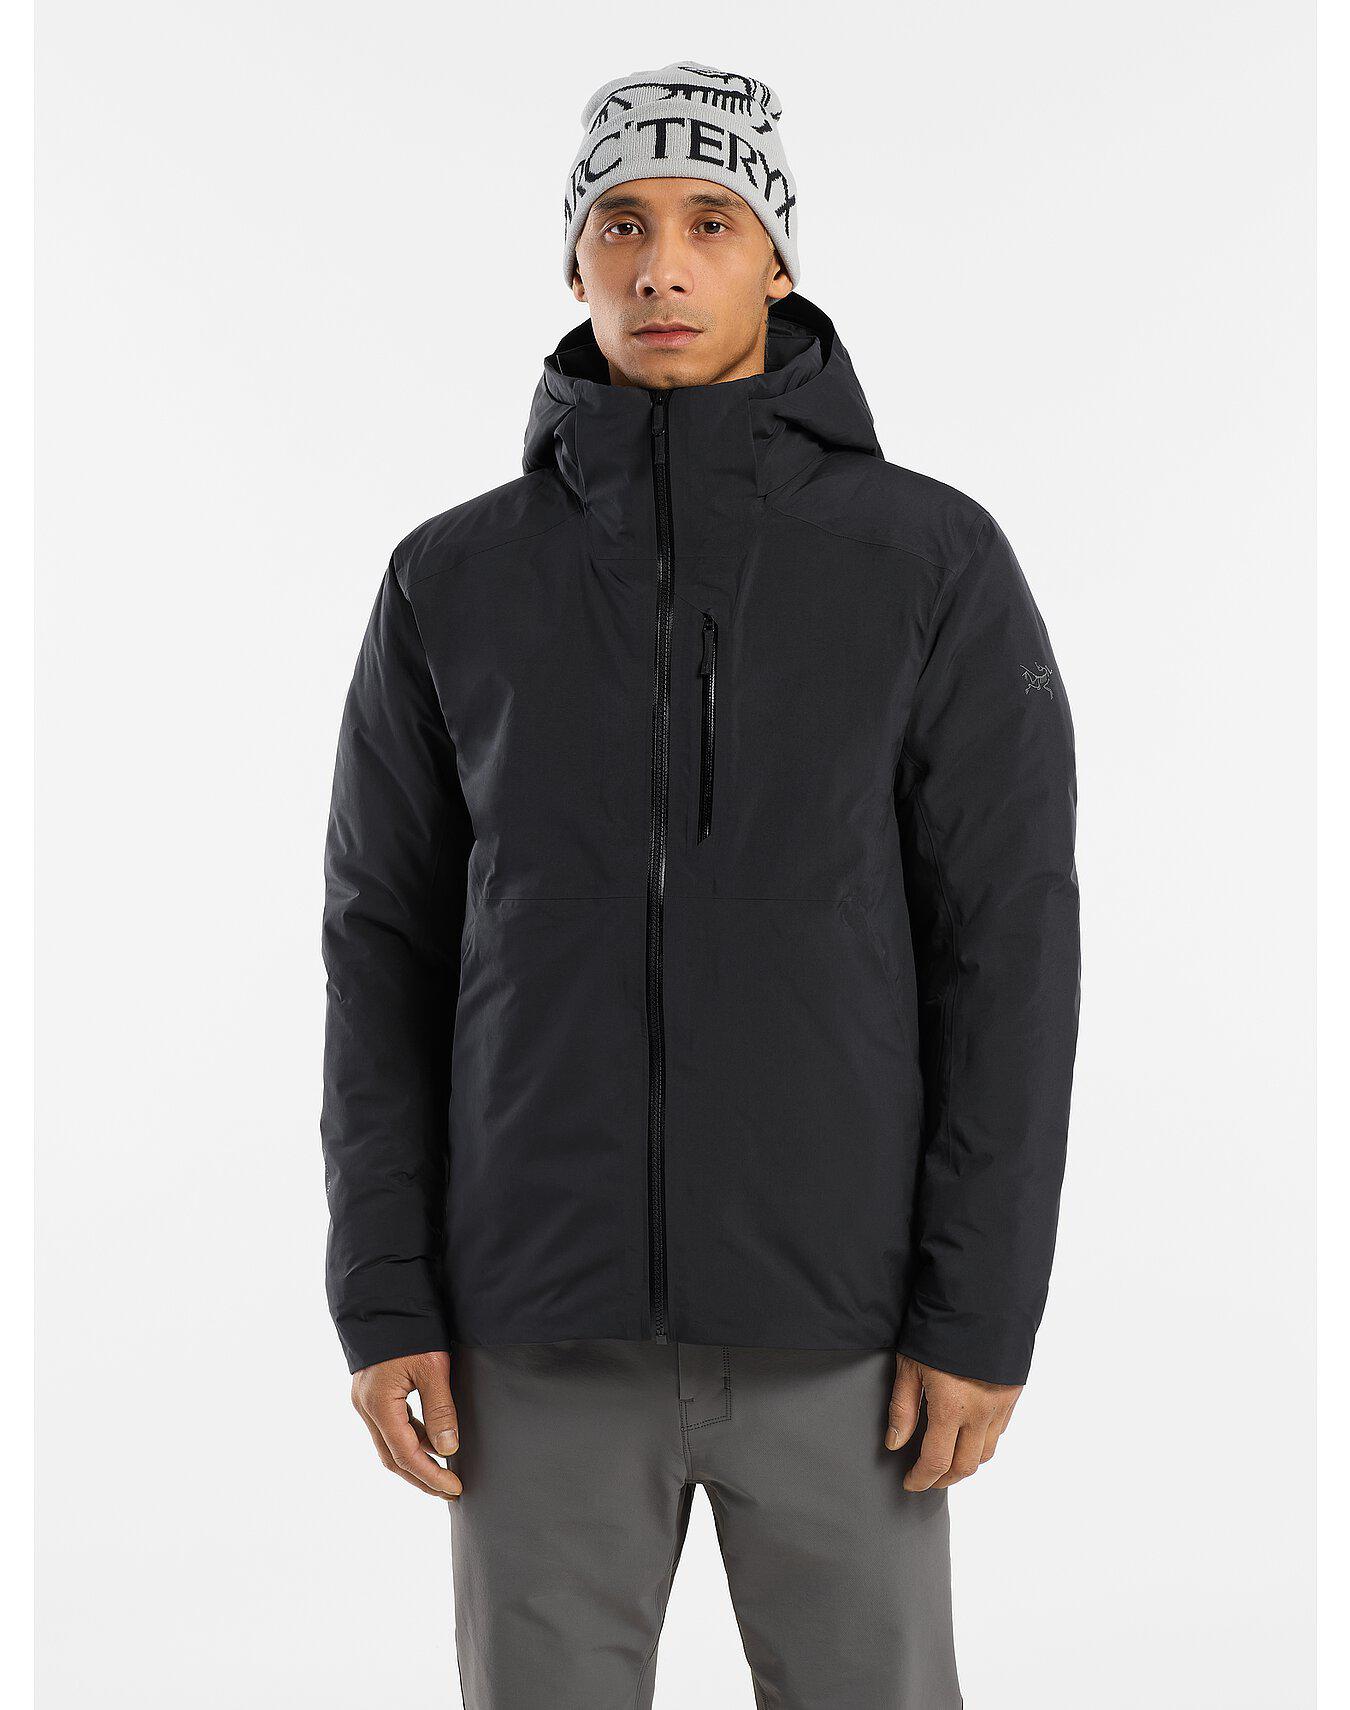 Ralle Insulated Jacket Men's by ARC'TERYX | jellibeans